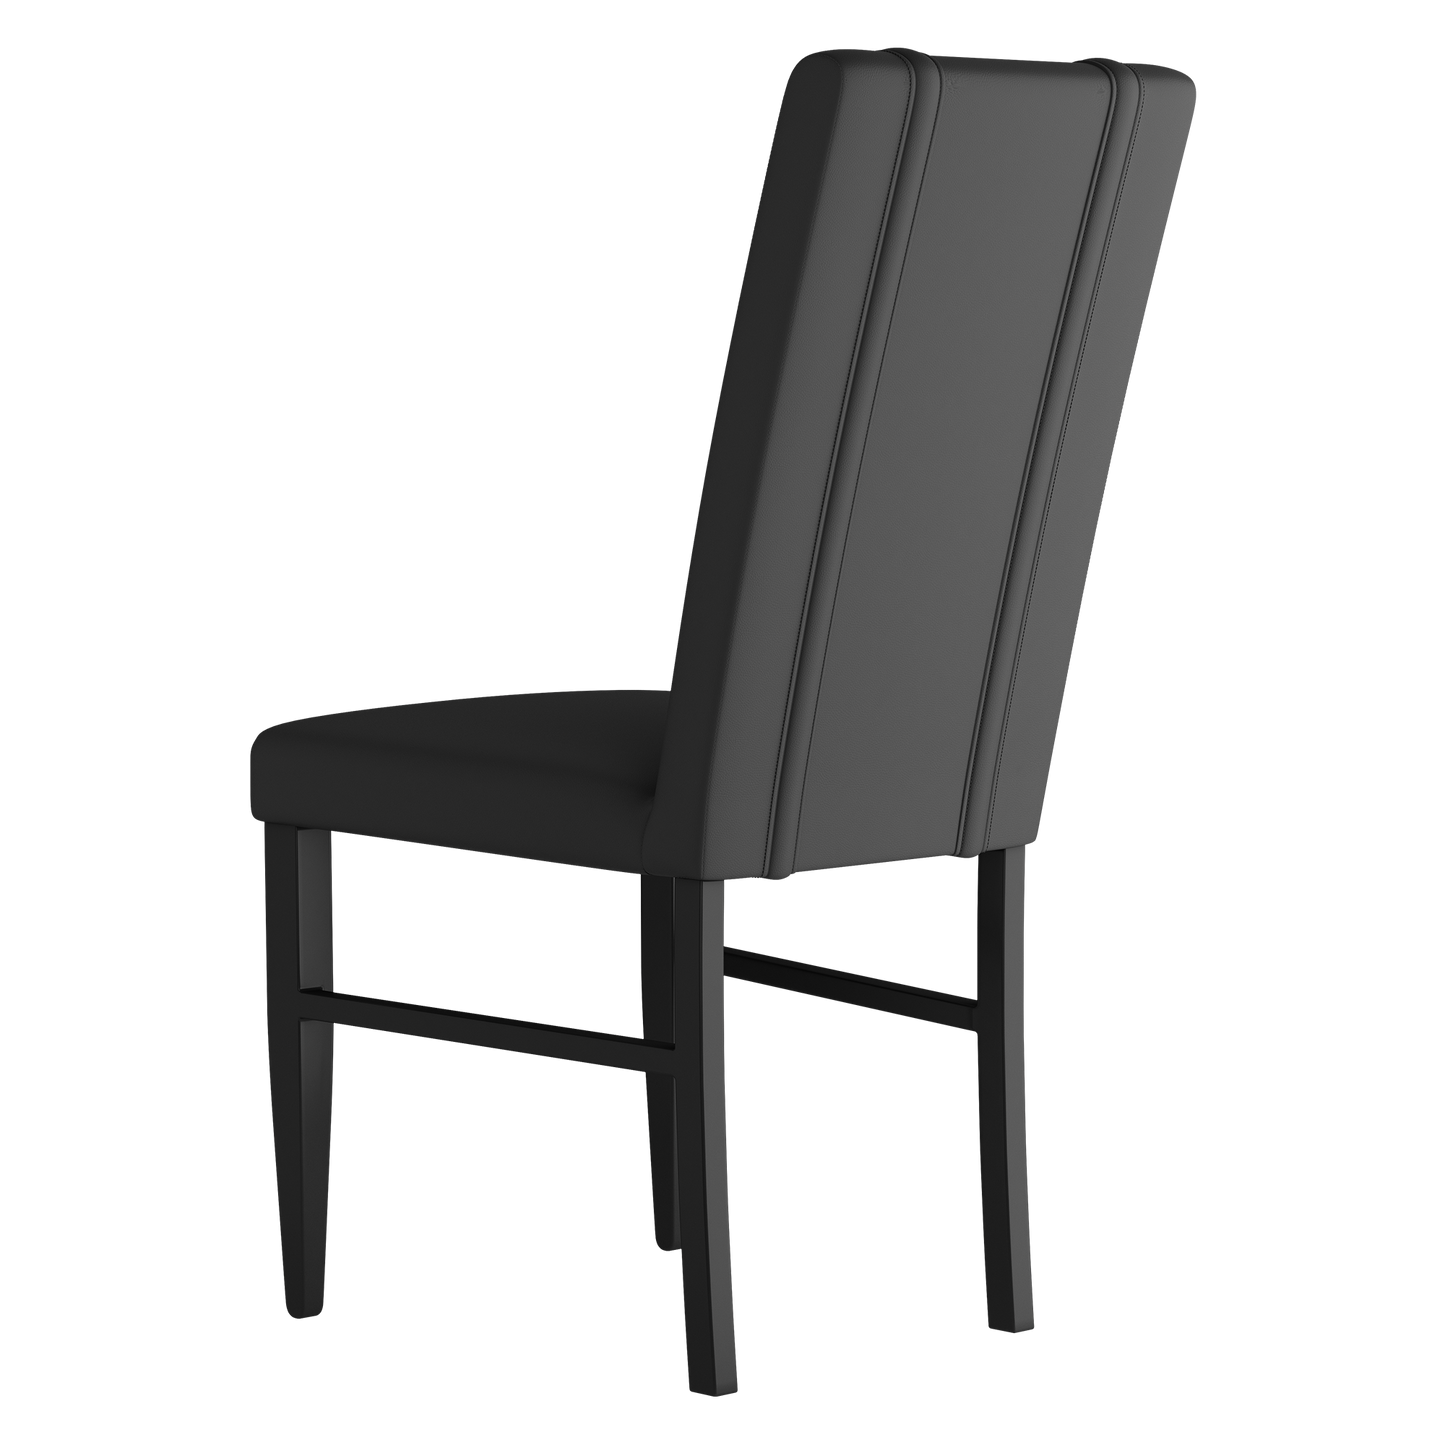 Side Chair 2000 with Vanderbilt Commodores Alternate Set of 2